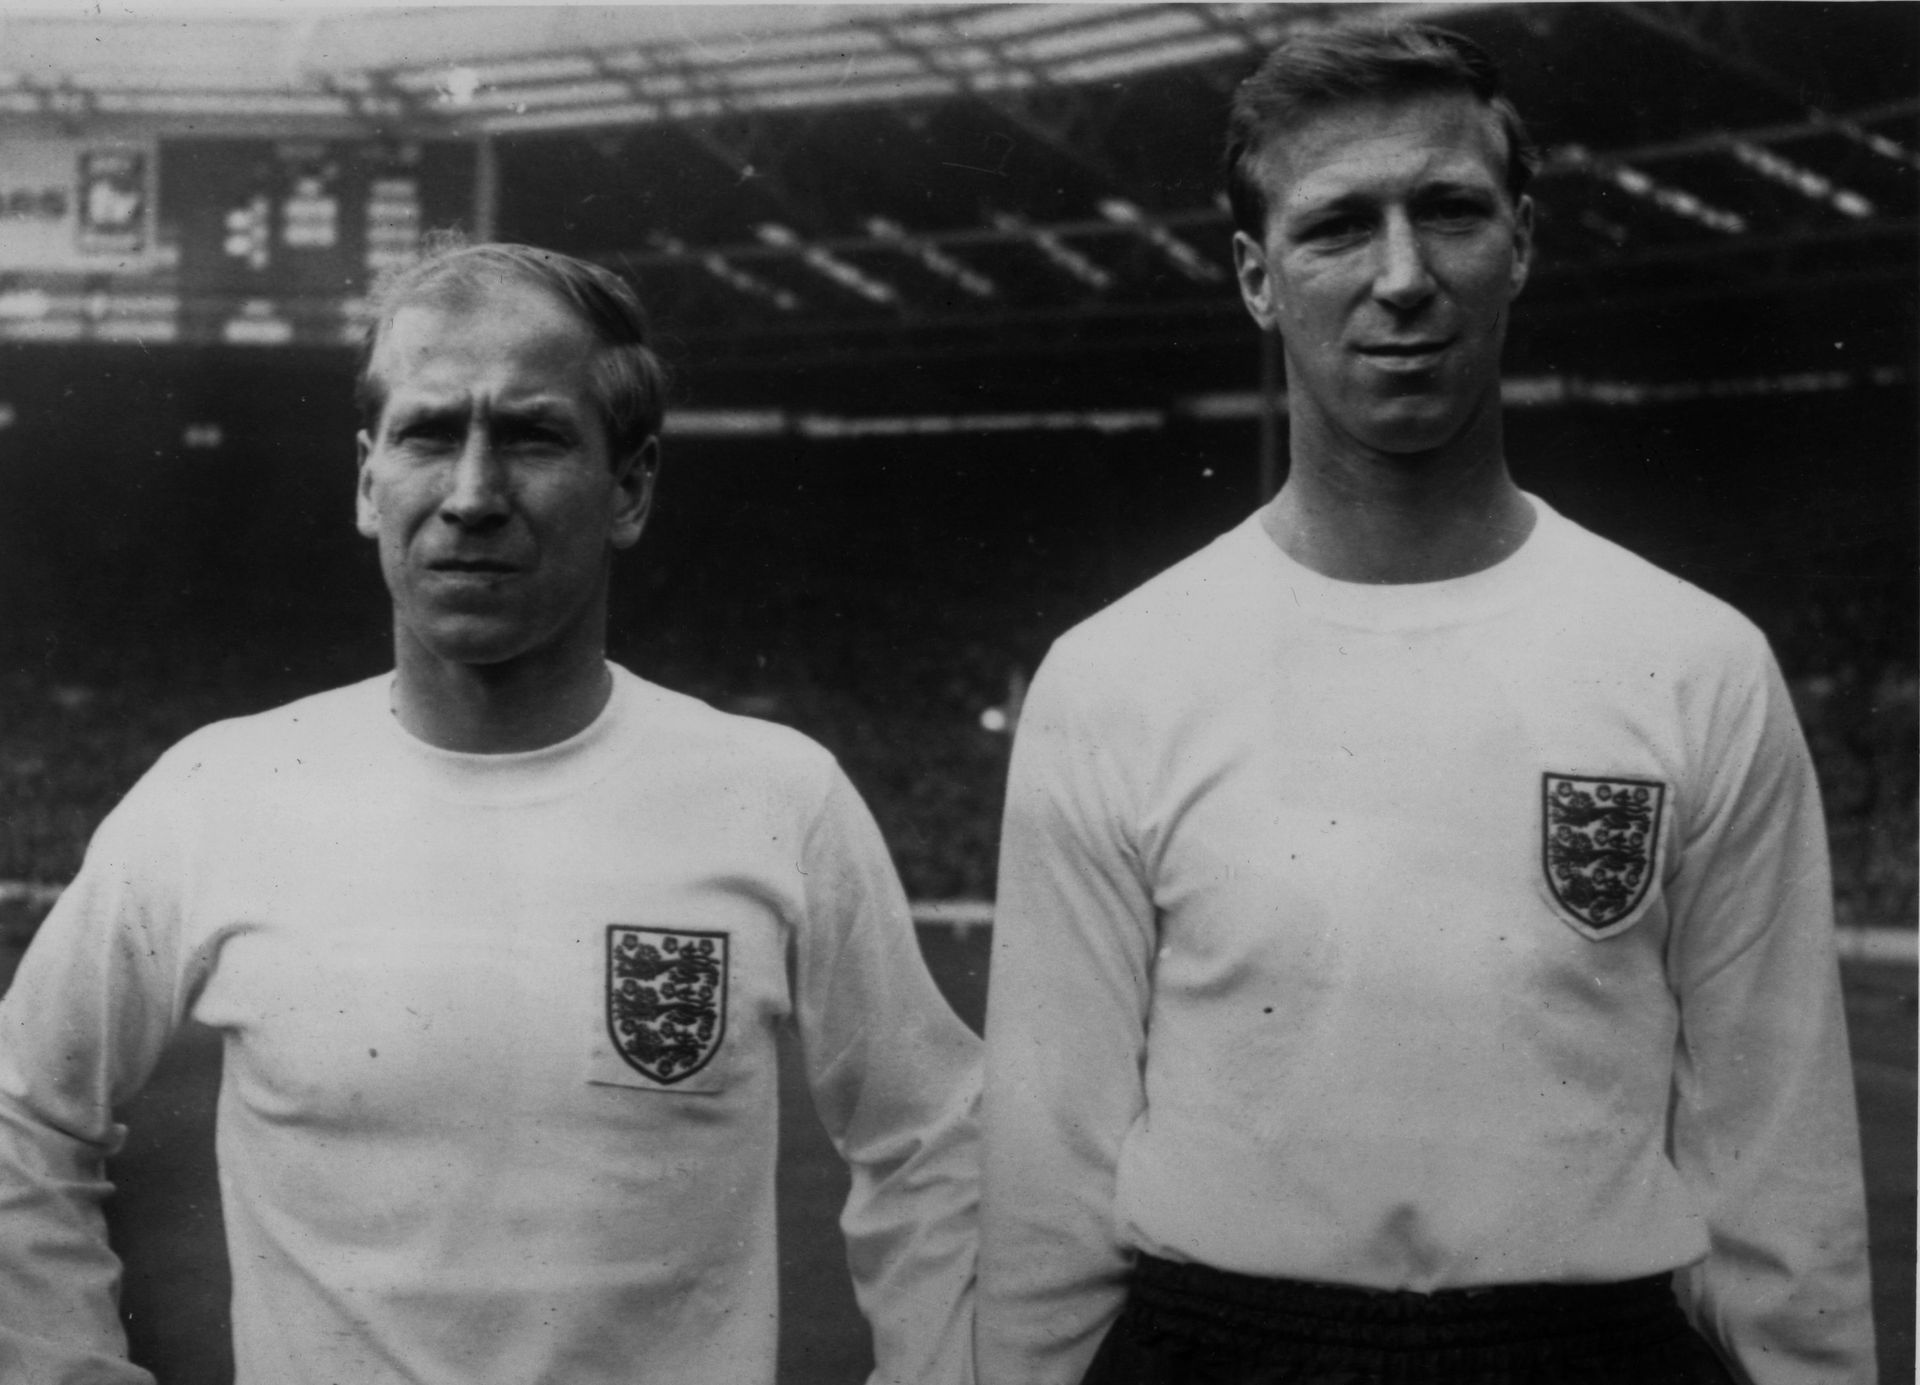 <p>                     Bobby and Jack Charlton were both part of England's World Cup-winning side in 1966 – the former a stylish midfielder and the latter a rugged central defender.                   </p>                                      <p>                     Club legends at Manchester United and Leeds, respectively, the two brothers endured a difficult relationship off the pitch and did not speak to each other for many years.                   </p>